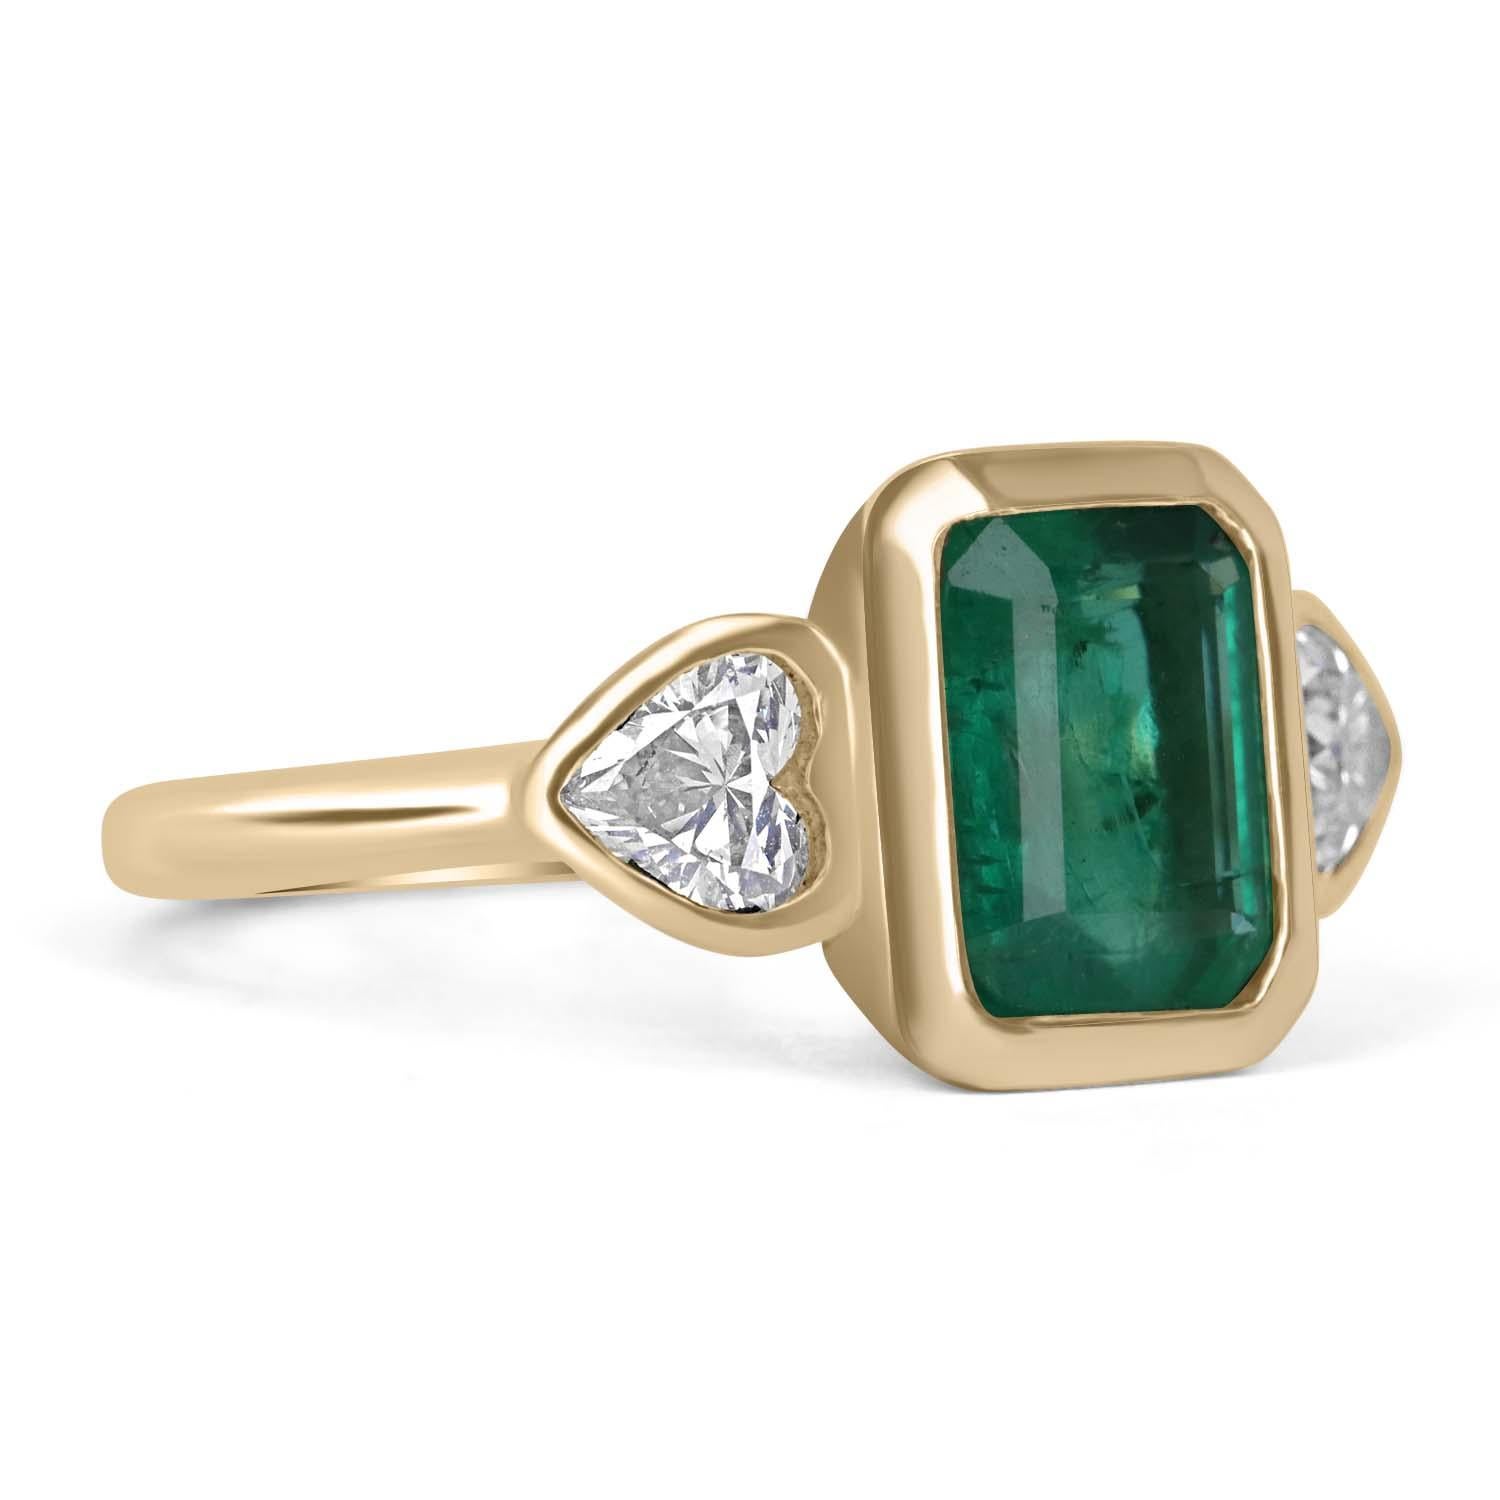 Shower her with love with this emerald and diamond heart cocktail ring. Designed and created by our own master jeweler, 